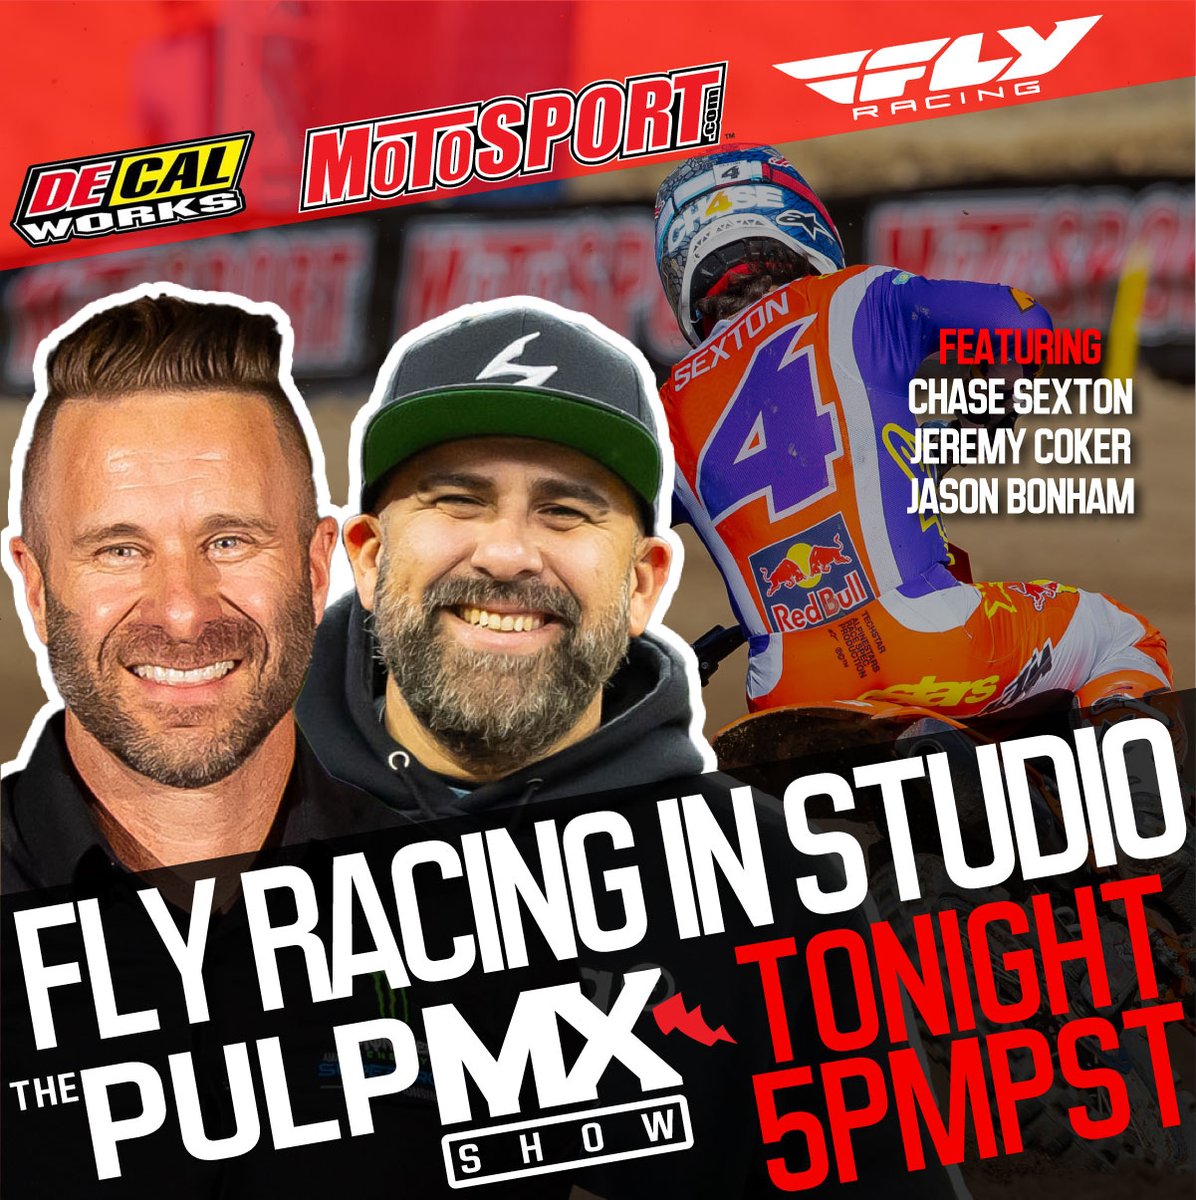 Have a question for Steve or Fly Racing's Jason Thomas, Anthony Armsby or Dalton Braun? Put 'em here for the @motosportinc Tweet at T segment! And tune in LIVE on Youtube at 8pm Eastern/5pm Pacific >> youtube.com/live/xeftVIj8_…